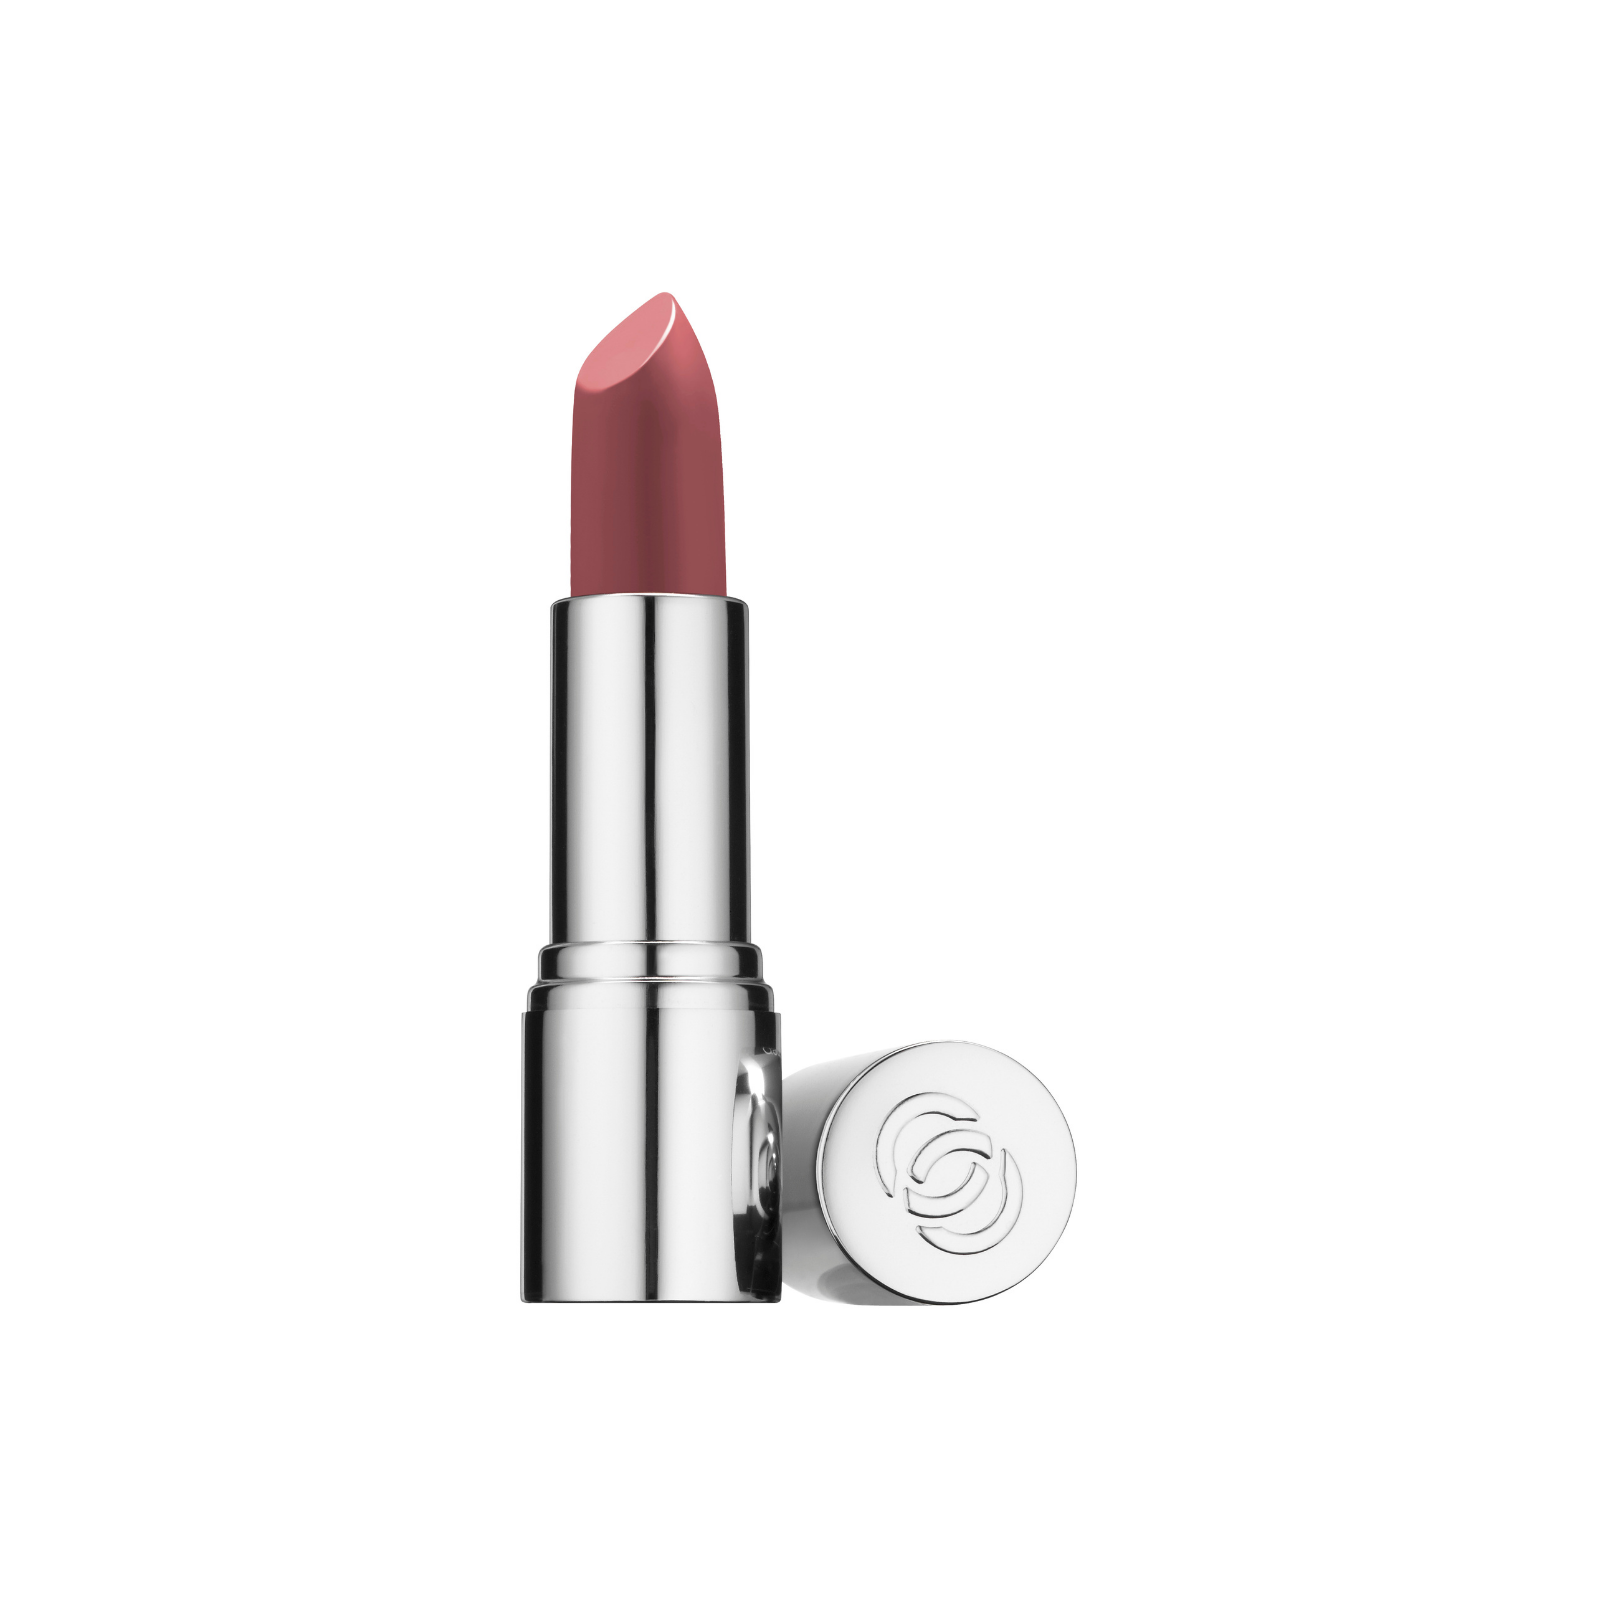 ASAP Mineral Lipcolour with Sunscreen - Four 4g